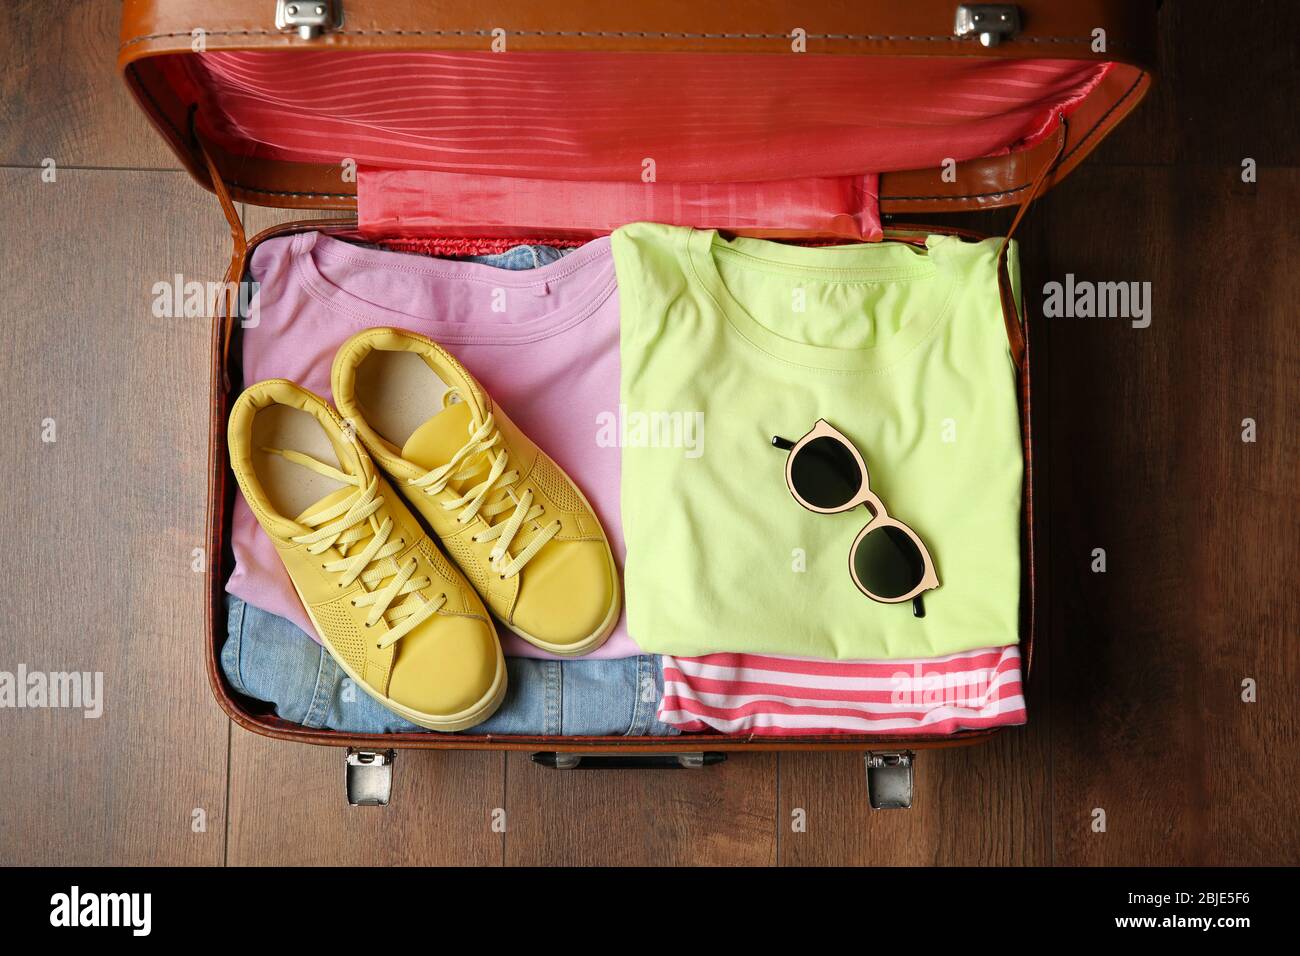 Open suitcase with clothes on wooden floor Stock Photo